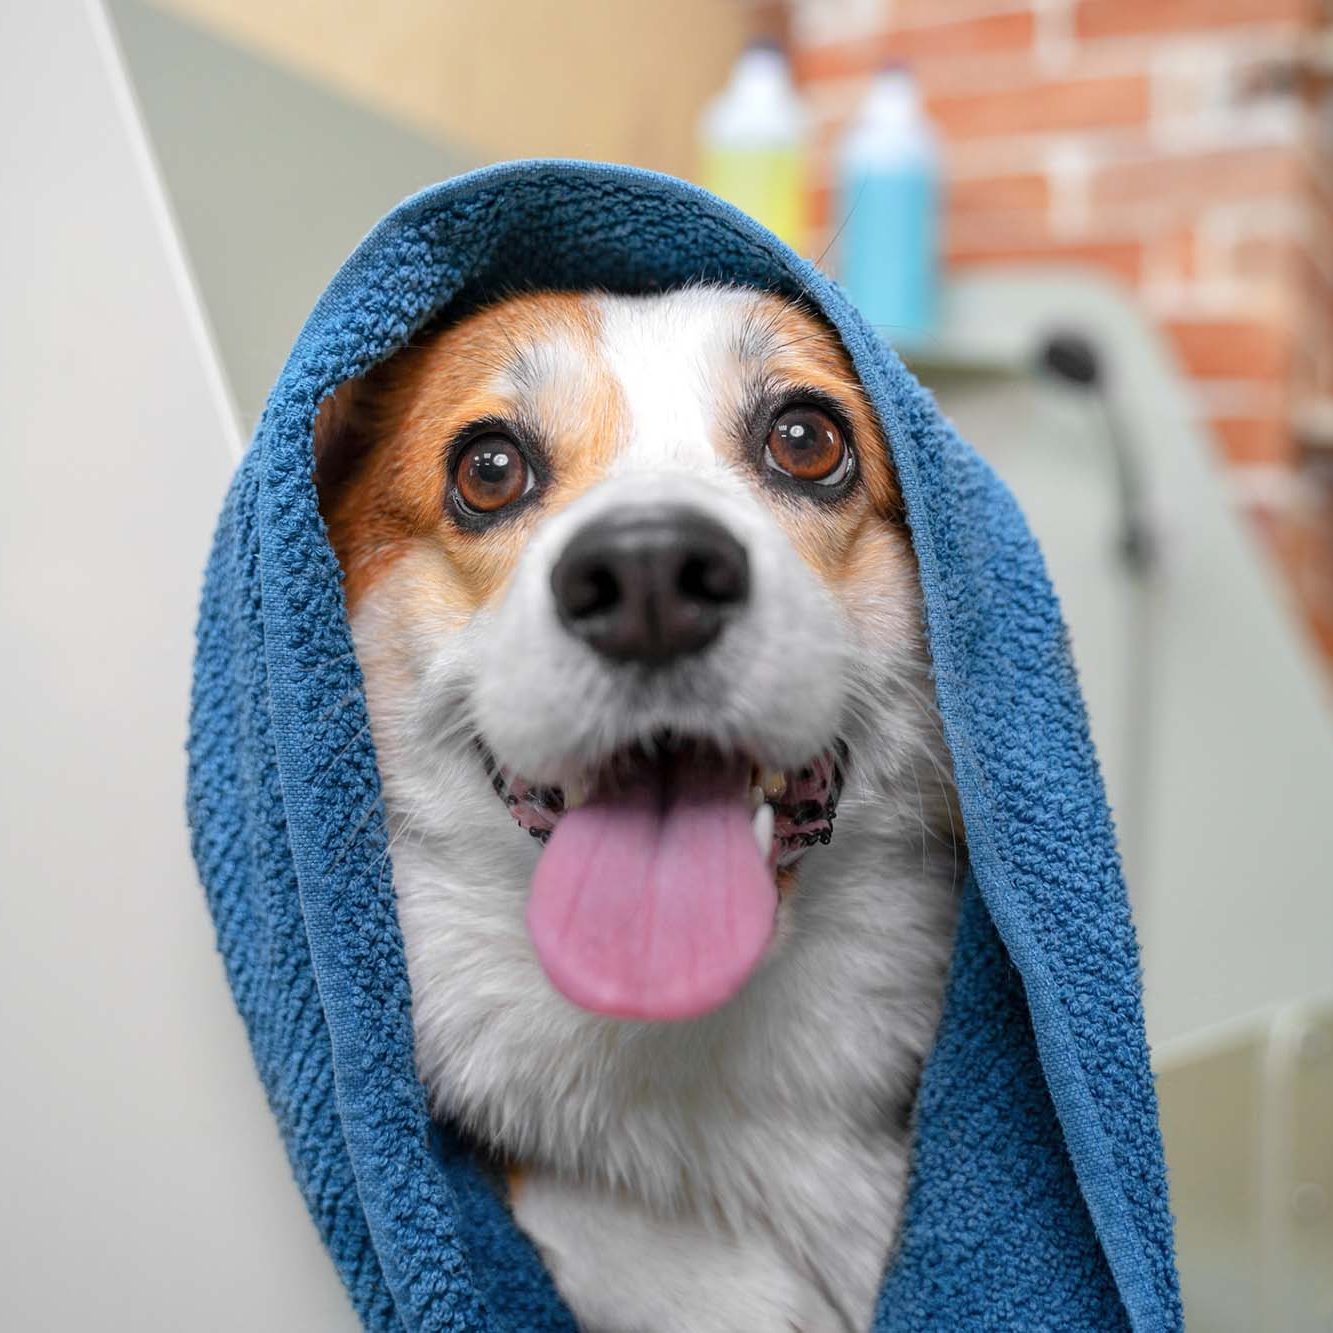 Funny portrait of a welsh corgi pembroke dog after a shower wrapped in a towel. Dog taking a bubble bath in grooming salon.